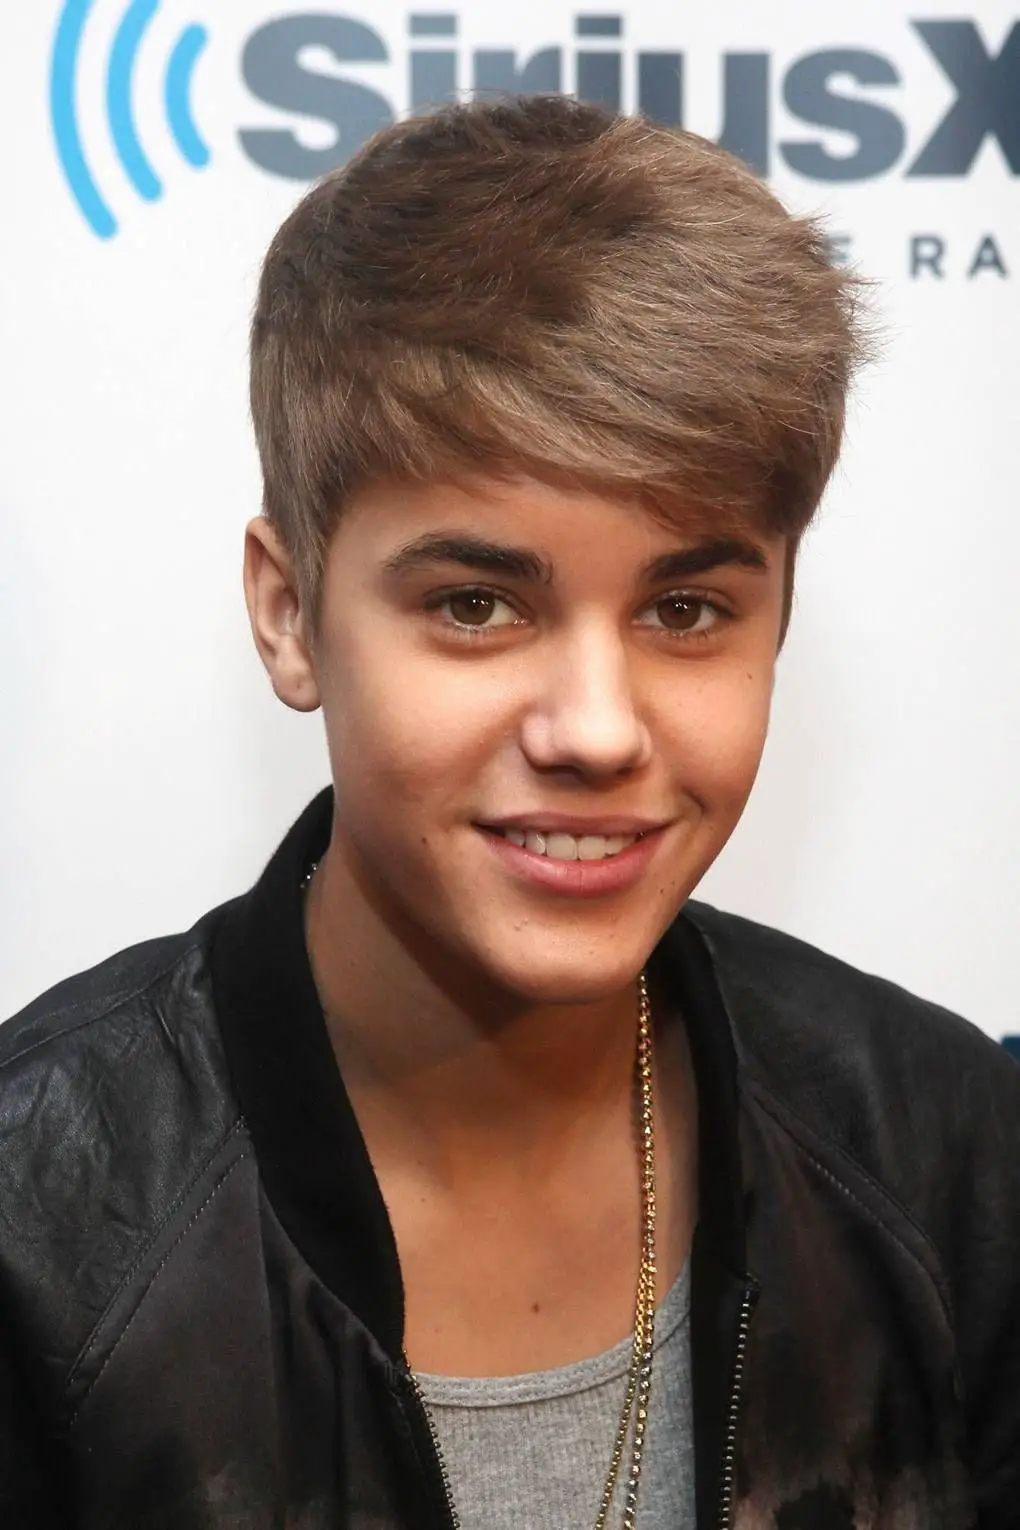 100-best-teenage-boys-haircuts-trending-this-year Classic Justin Bieber